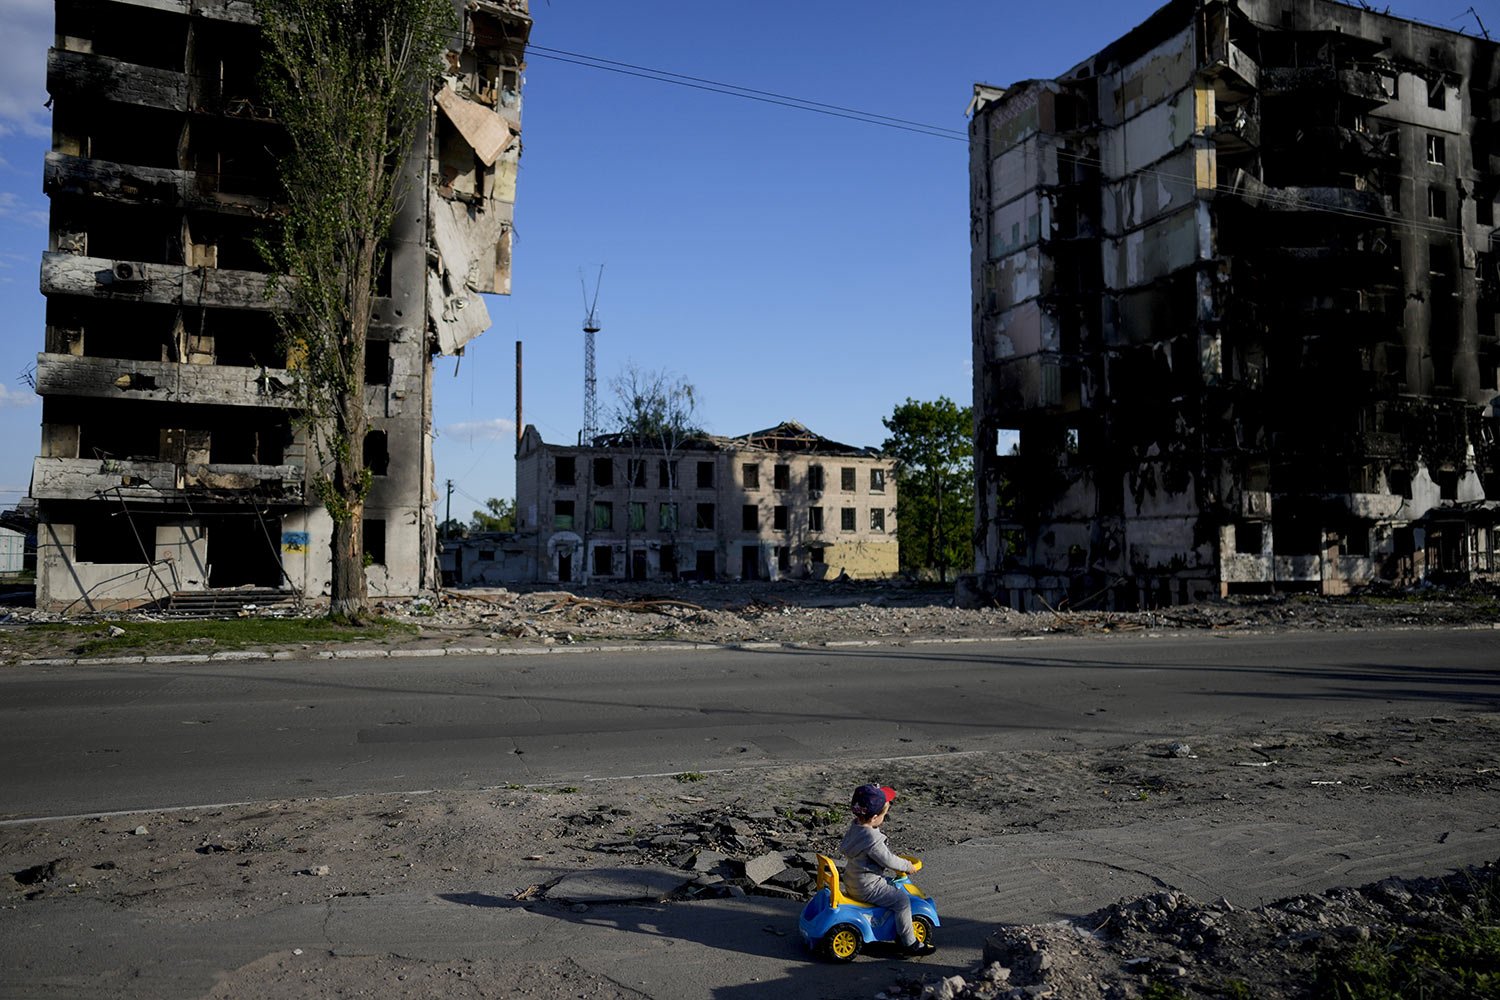  A boy plays in front of houses destroyed by shelling in Borodyanka, Ukraine, Tuesday, May 24, 2022. (AP Photo/Natacha Pisarenko) 